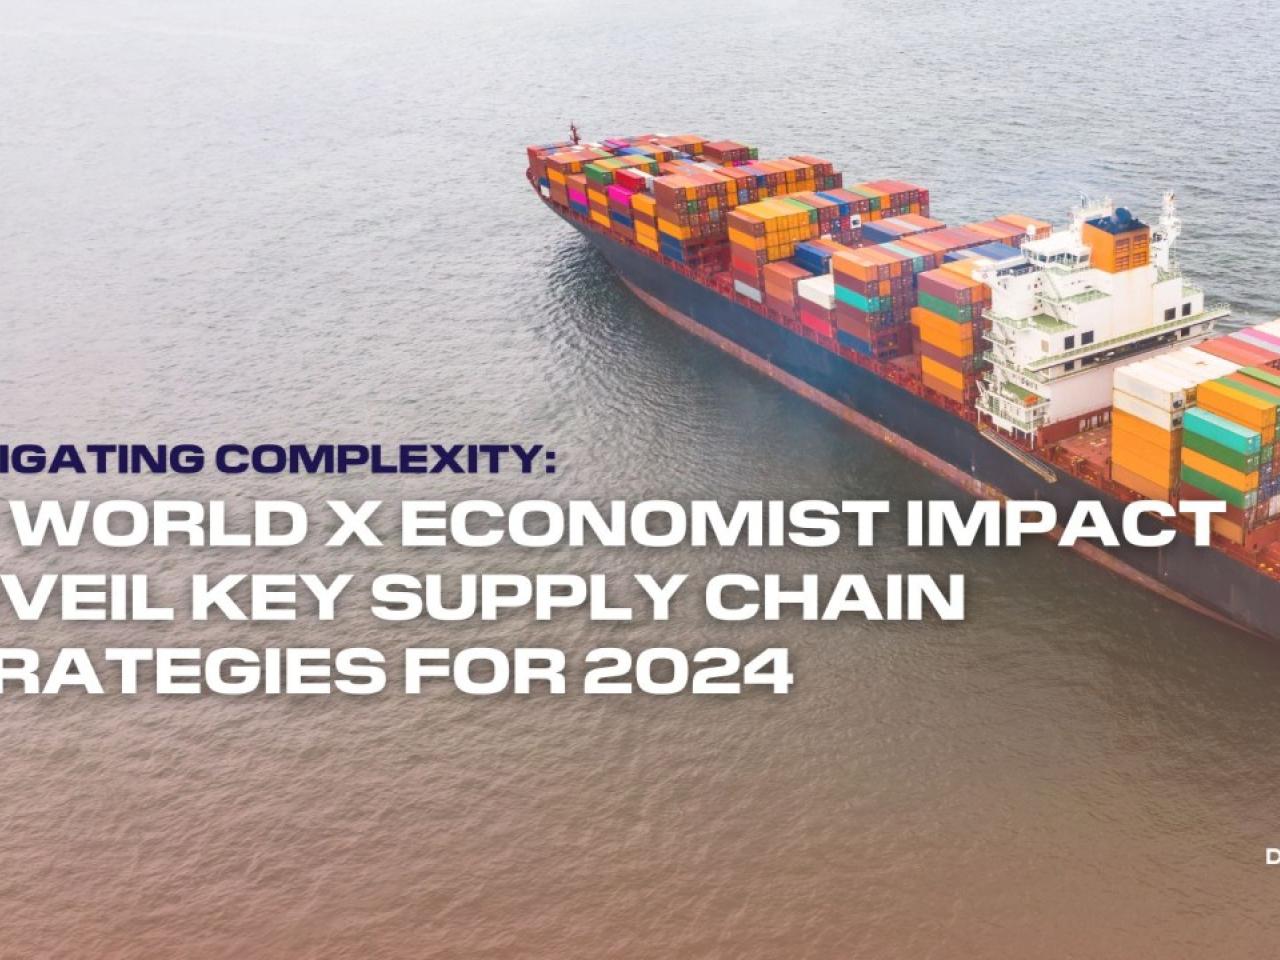 Shipping container and text "Navigating Complexity: DP World X Economist Impact Unveil Key Supply Chain Strategies for 2024